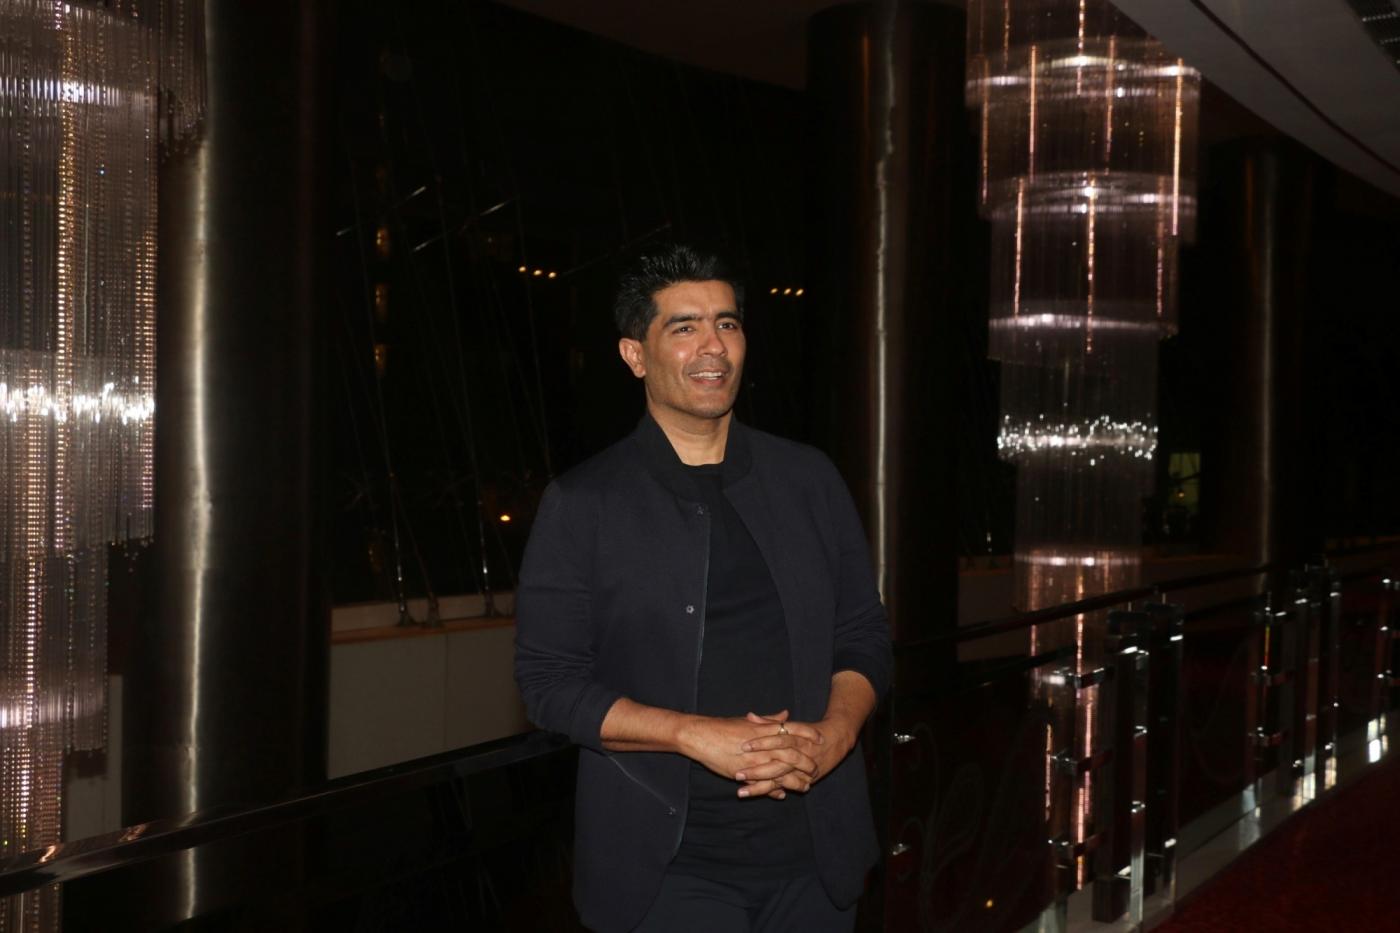 Mumbai: Fashion designer Manish Malhotra at the Wedding Junction Preview Panel Discussion in Mumbai on Aug 12, 2018. (Photo: IANS) by .